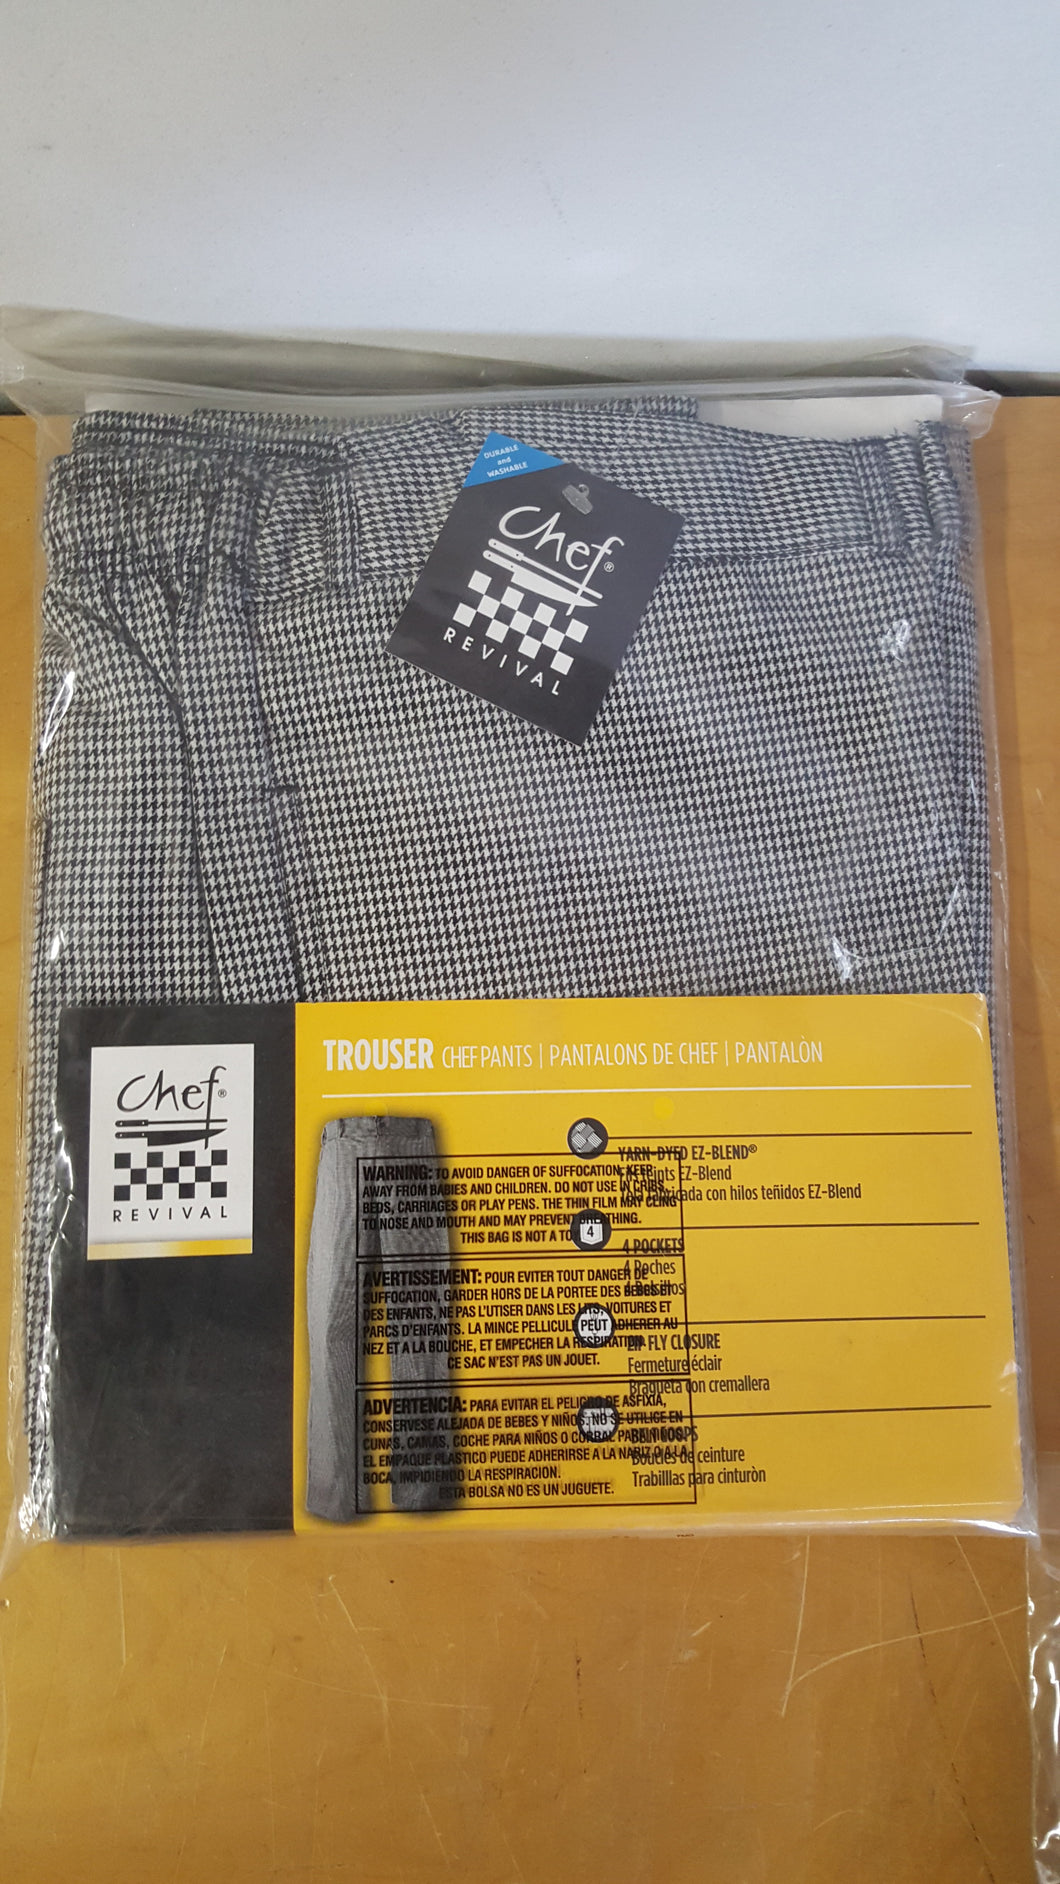 Chef Revival Trouser Chef Pants Size 3X Hounds Tooth P034HT-3X